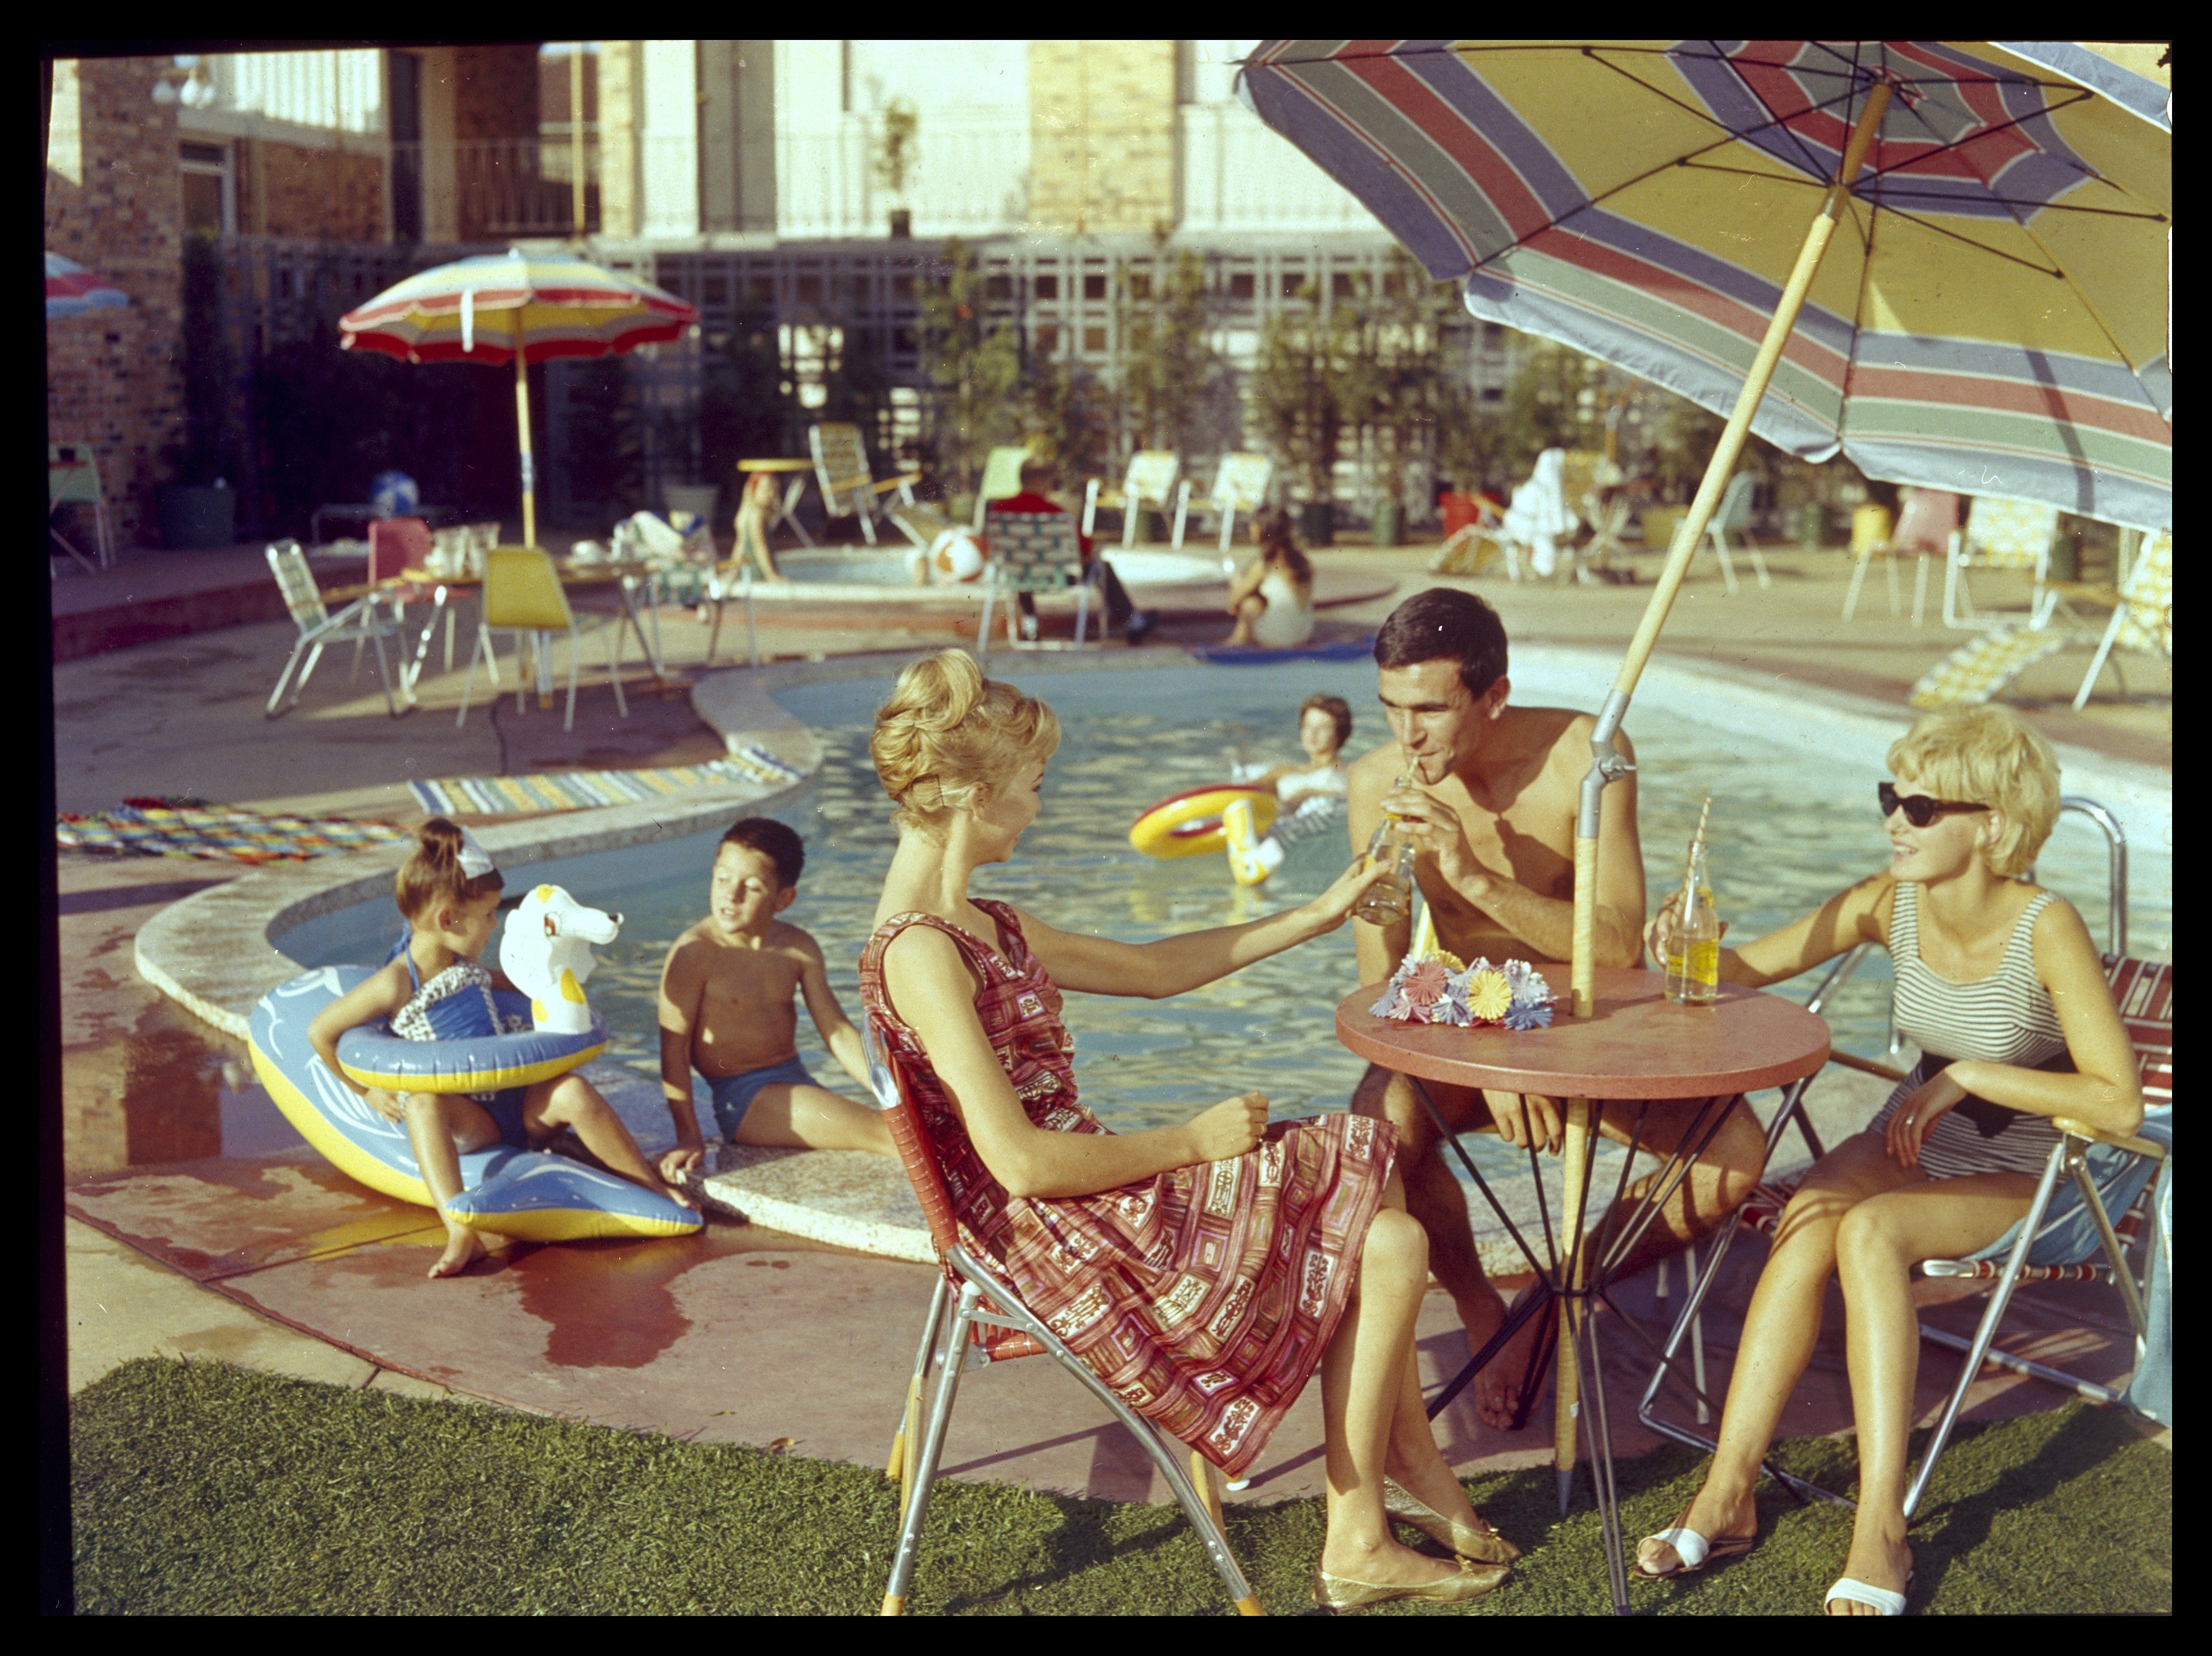 Archives exhibition uncovers the magic of motels, kidney-shaped pools and Continental breakfasts